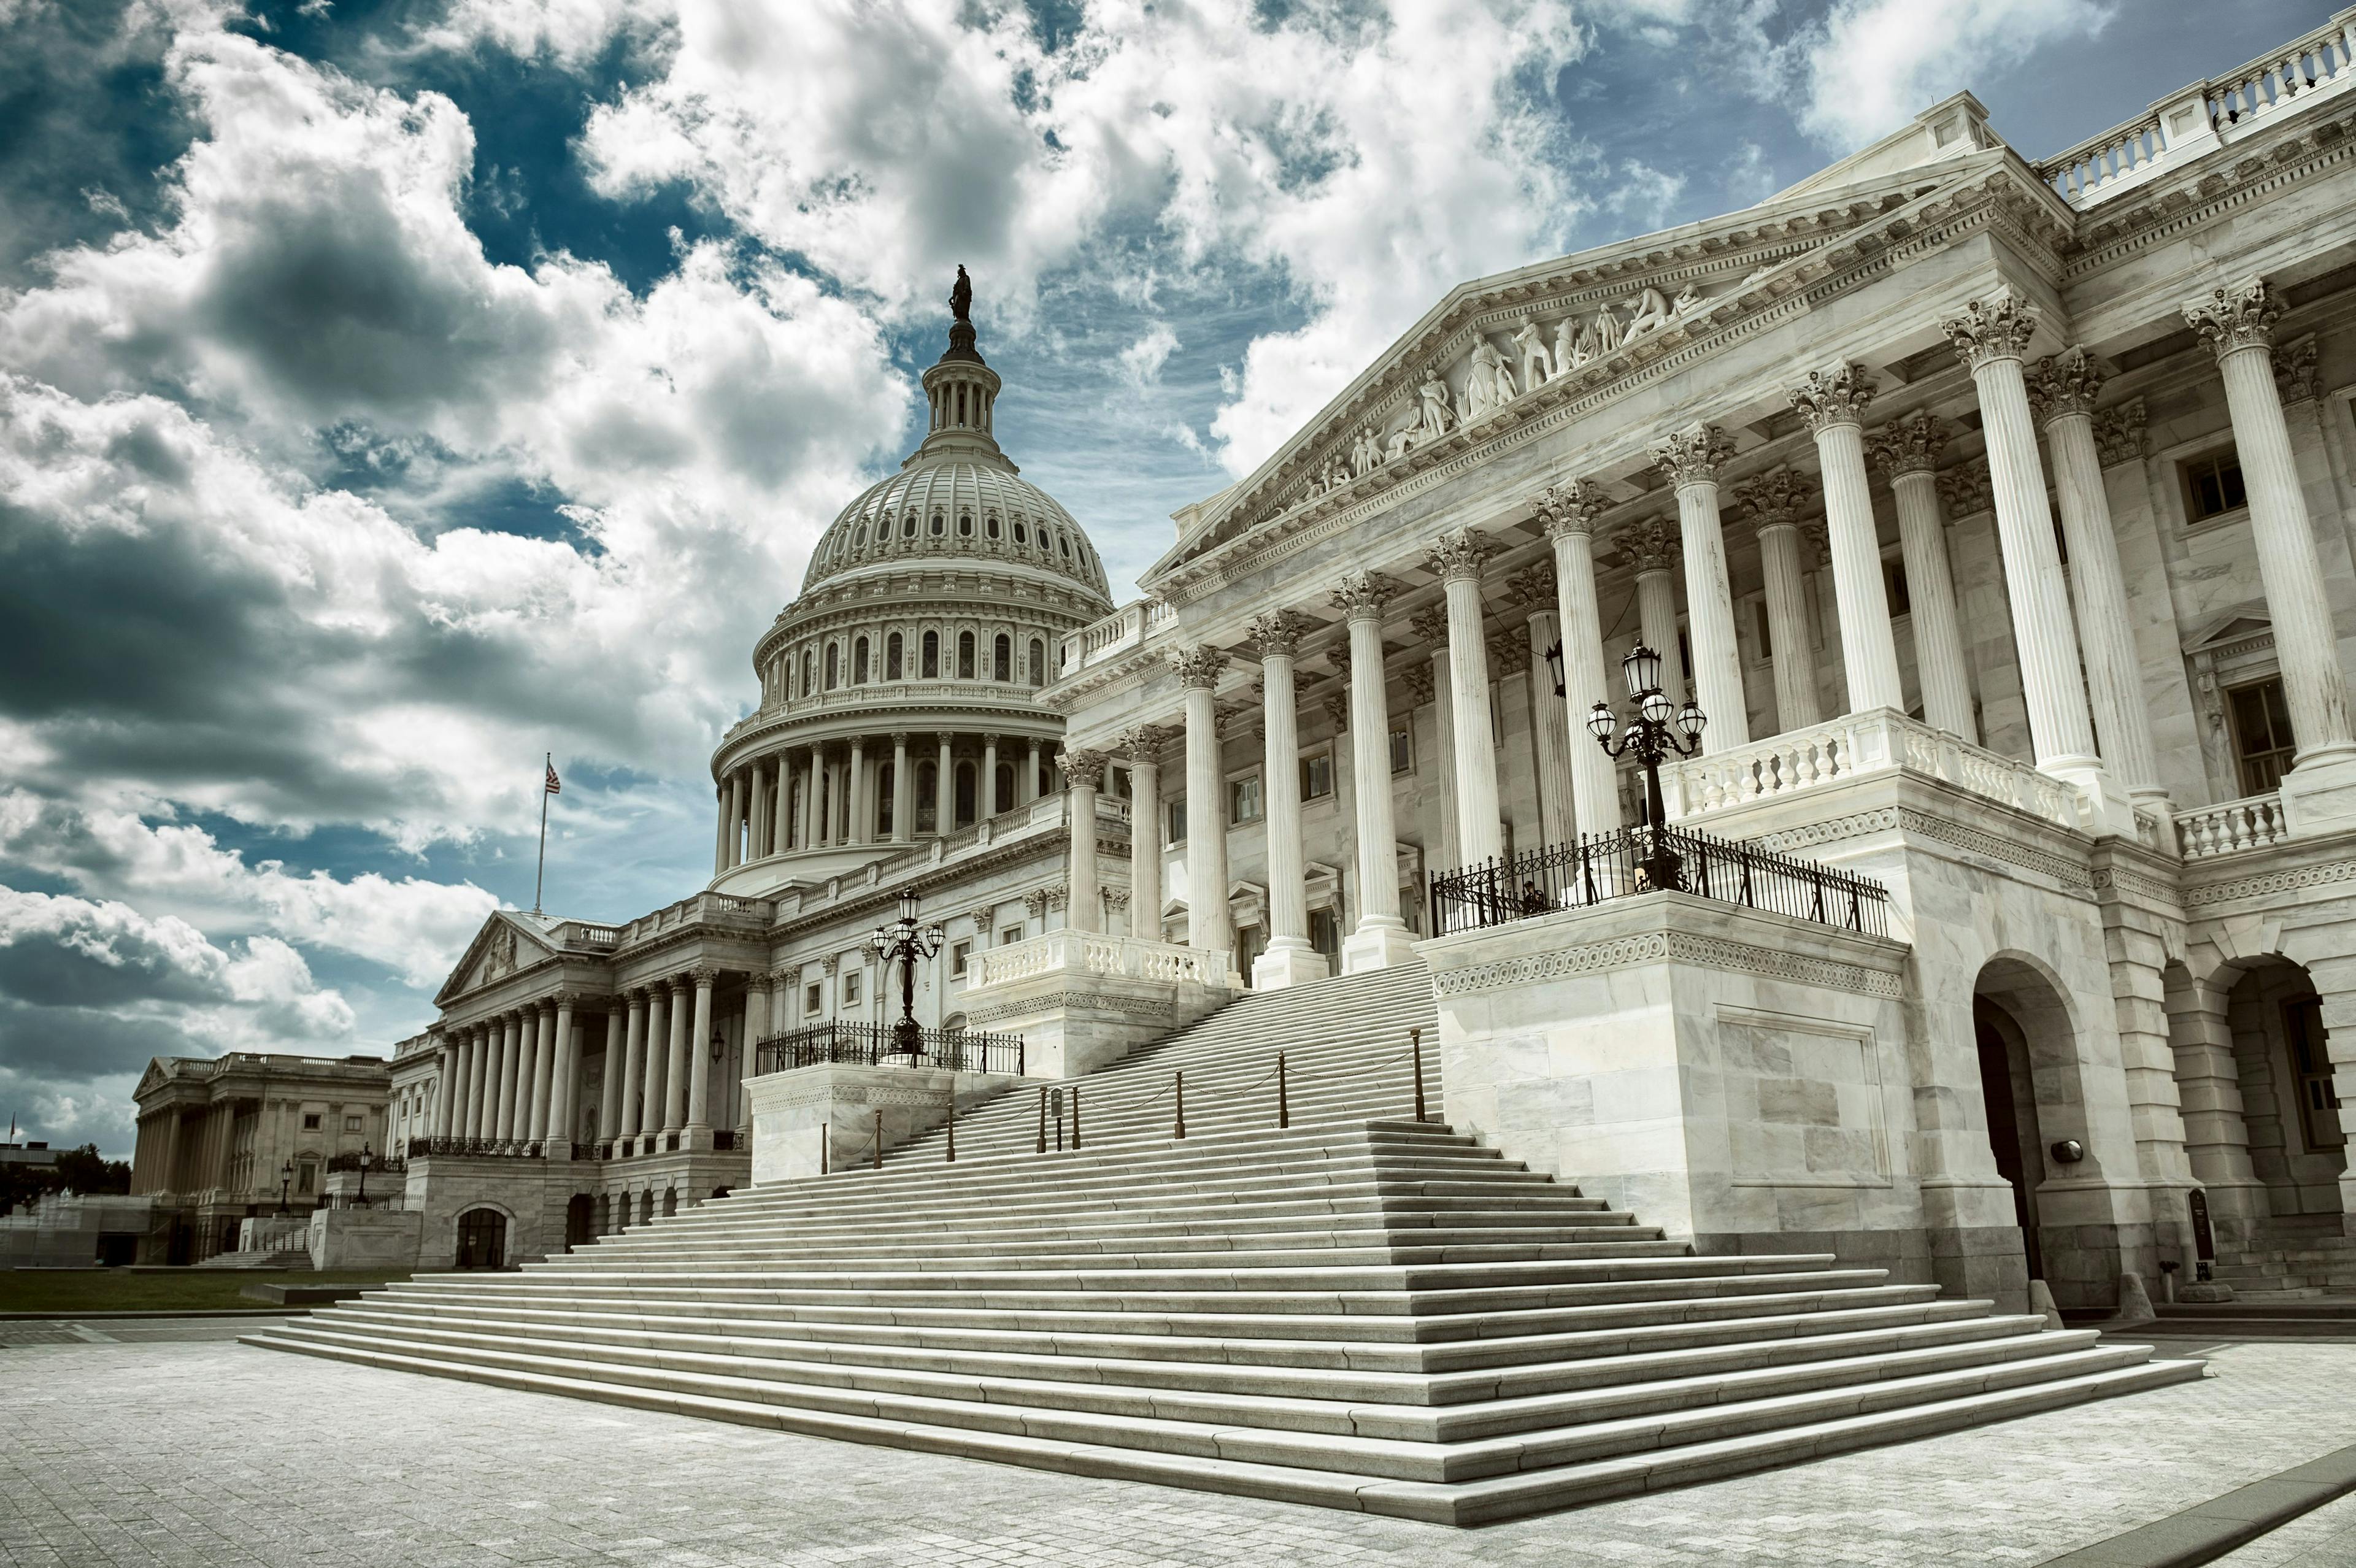 Stark cloudy weather over empty exterior view of the US Capitol Building in Washington DC, USA | Image Credit: lazyllama - stock.adobe.com